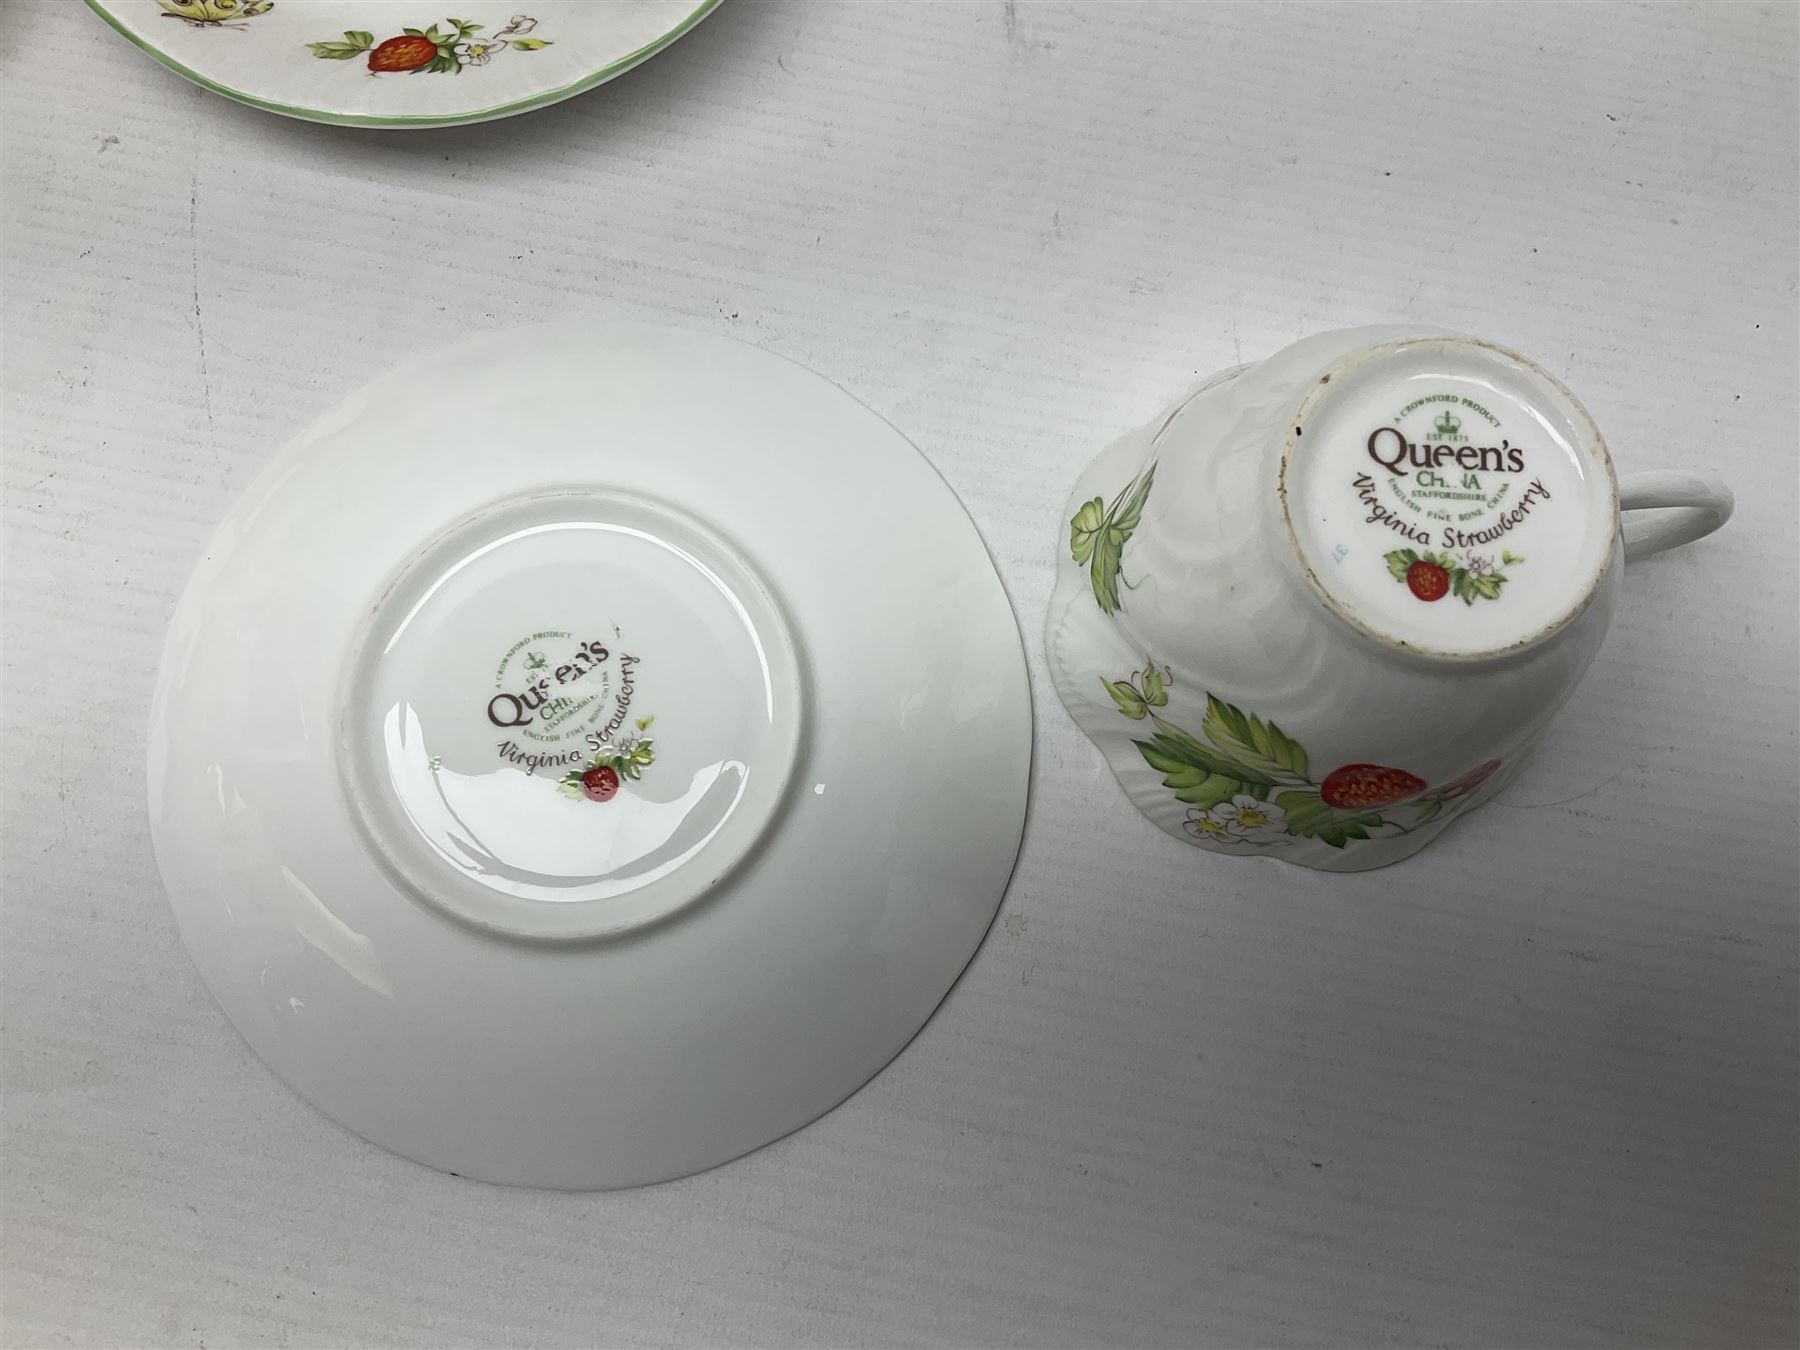 Ringtons and Queen's China Virginia Strawberry pattern teawares - Image 8 of 8